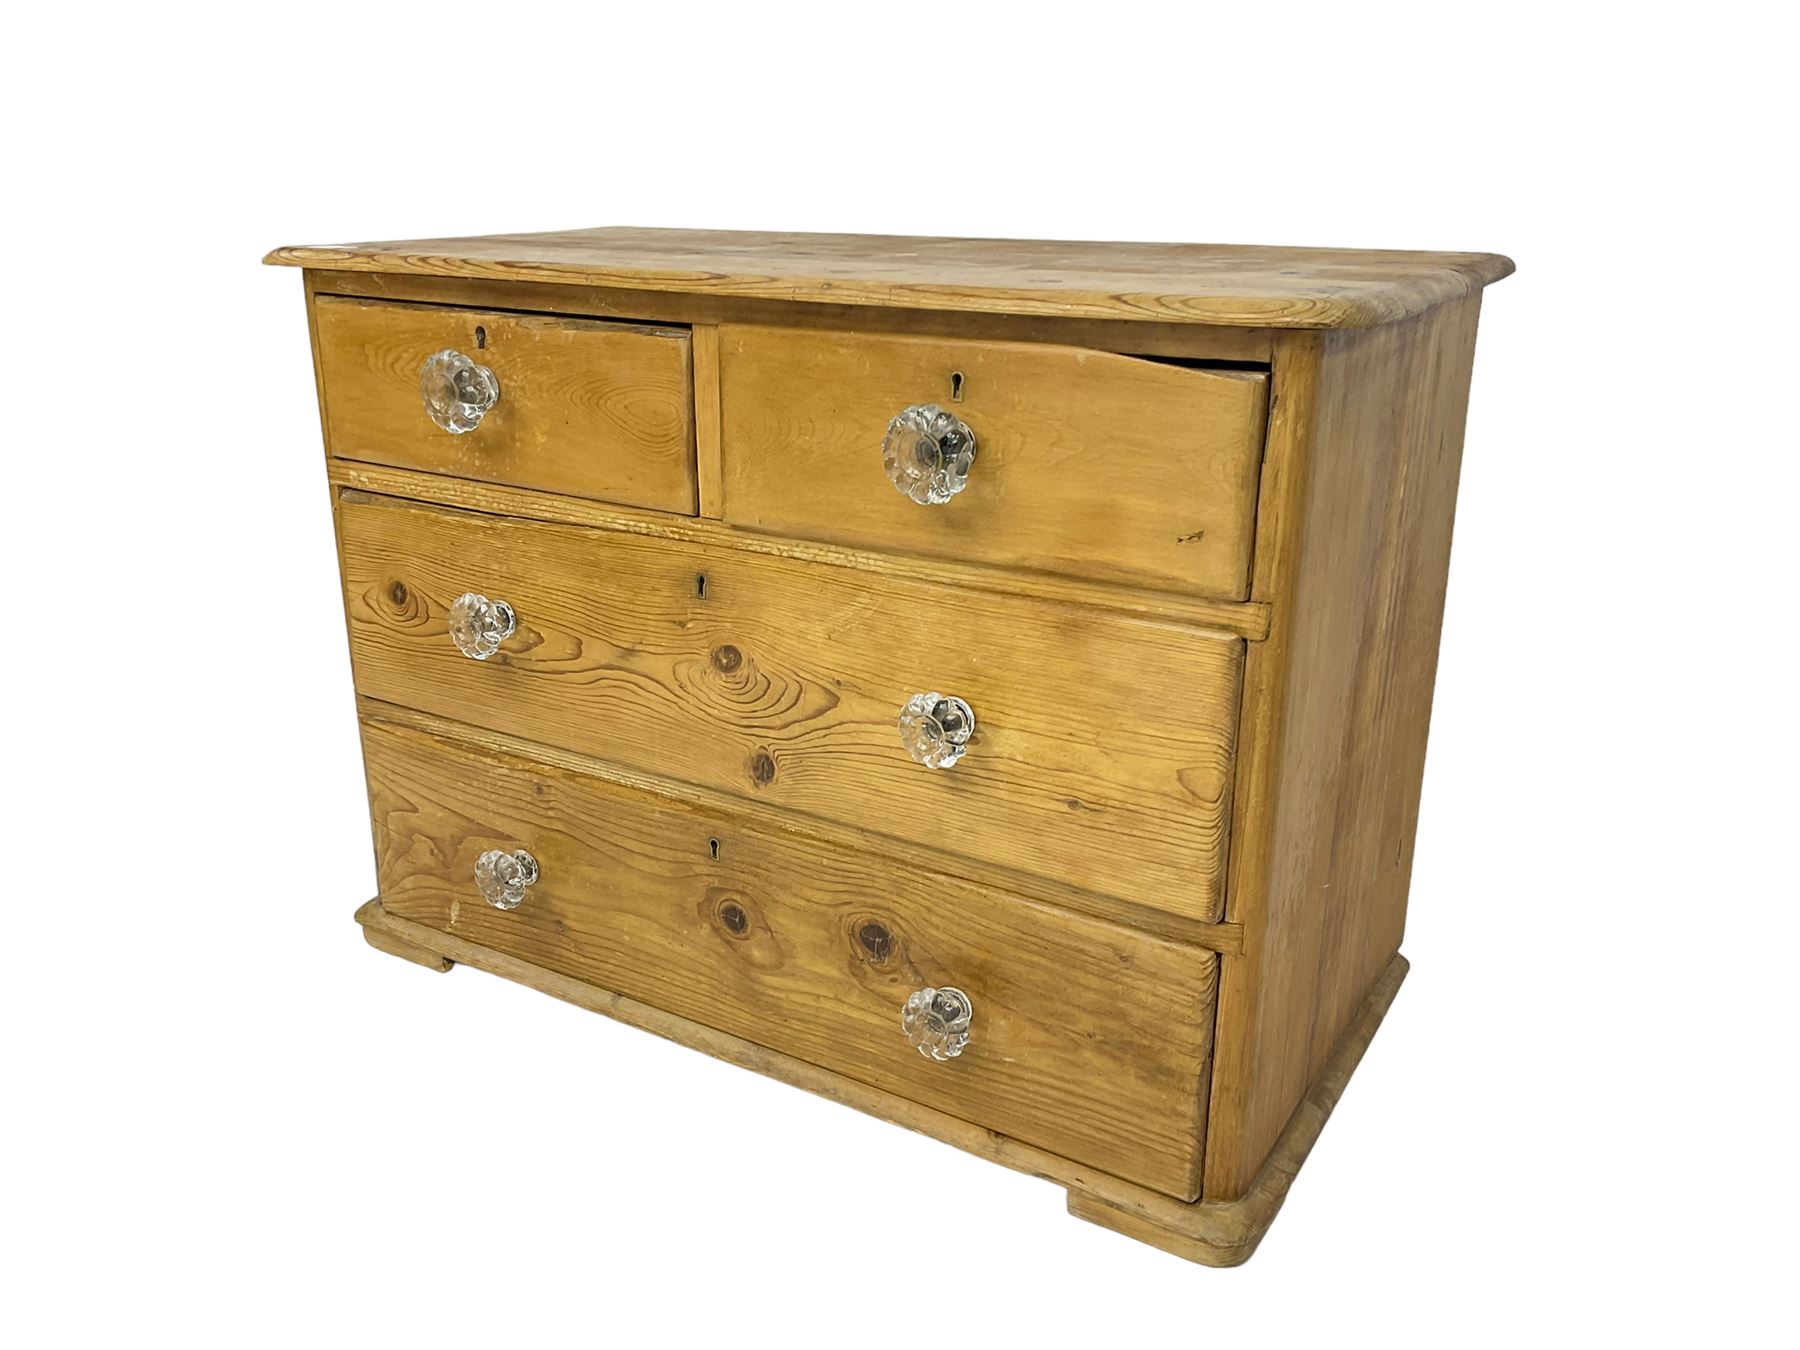 Victorian pine chest - Image 6 of 6